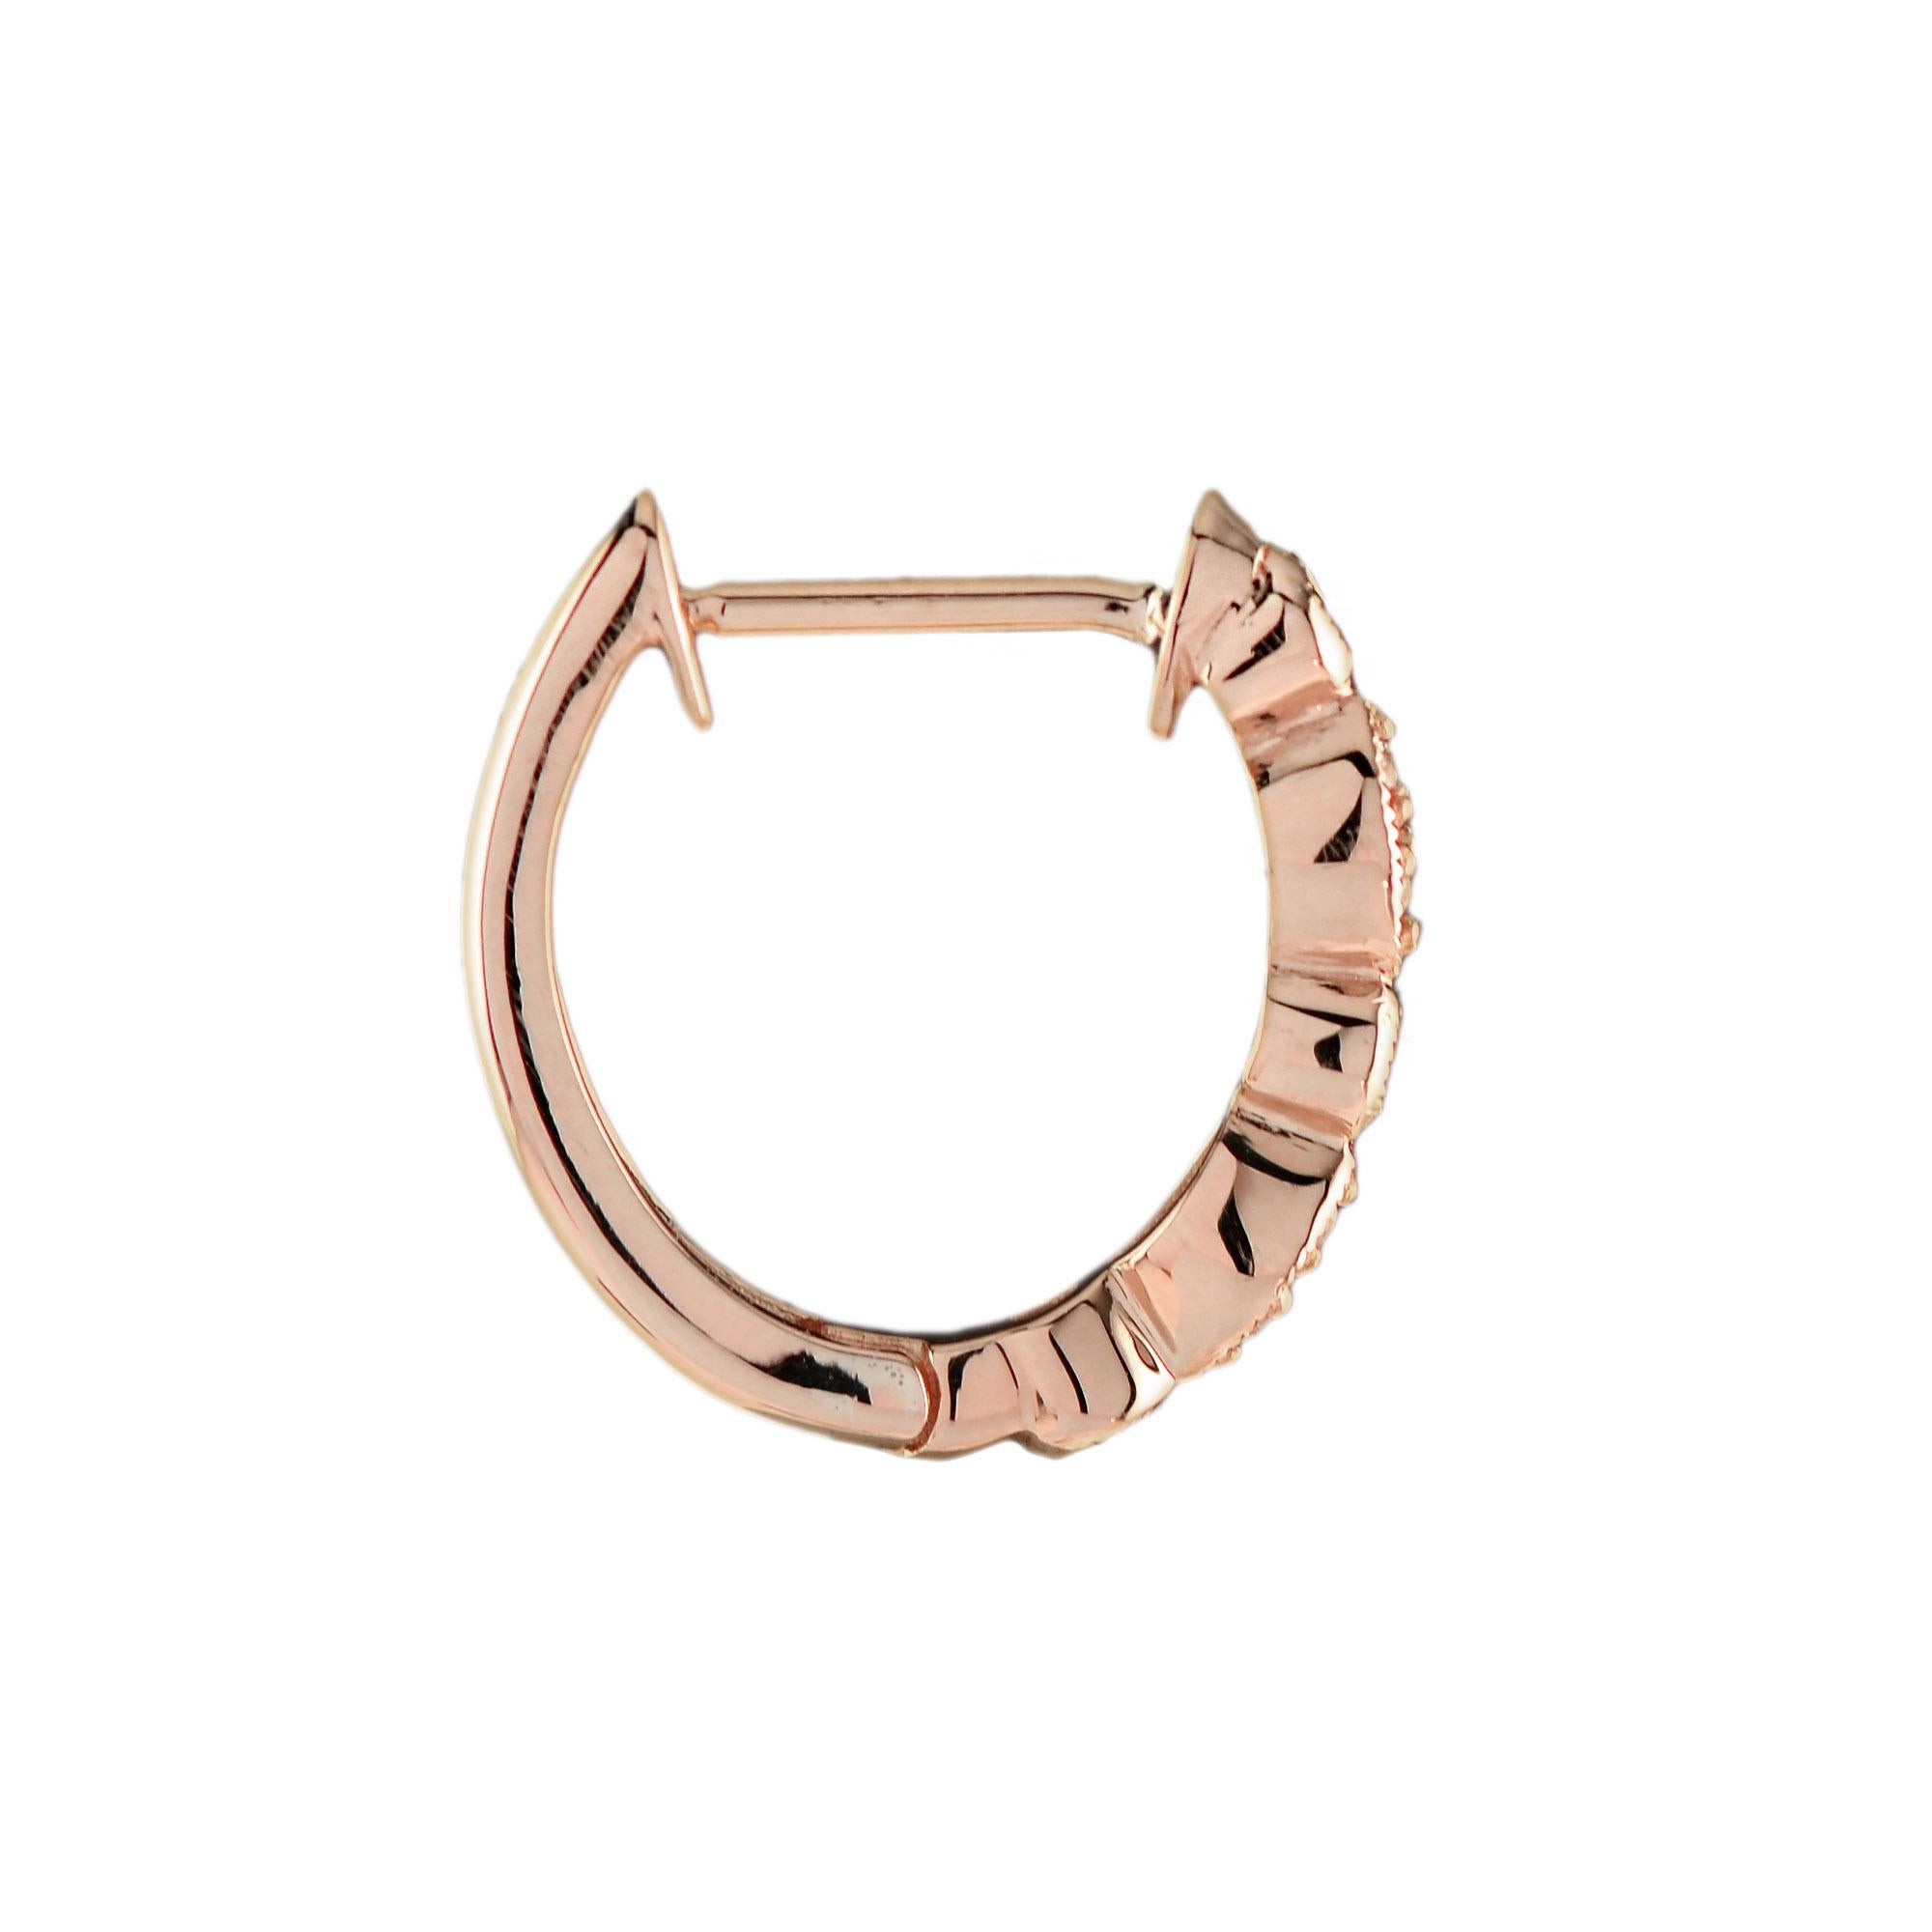 Sparkling with light to rival the season of celebration round ruby and diamonds in Art Deco inspired settings giving these 14k rose gold hoops timeless appeal.

Earrings Information
Style: Art Deco
Metal: 14K Rose Gold
Width: 3 mm.
Length: 15